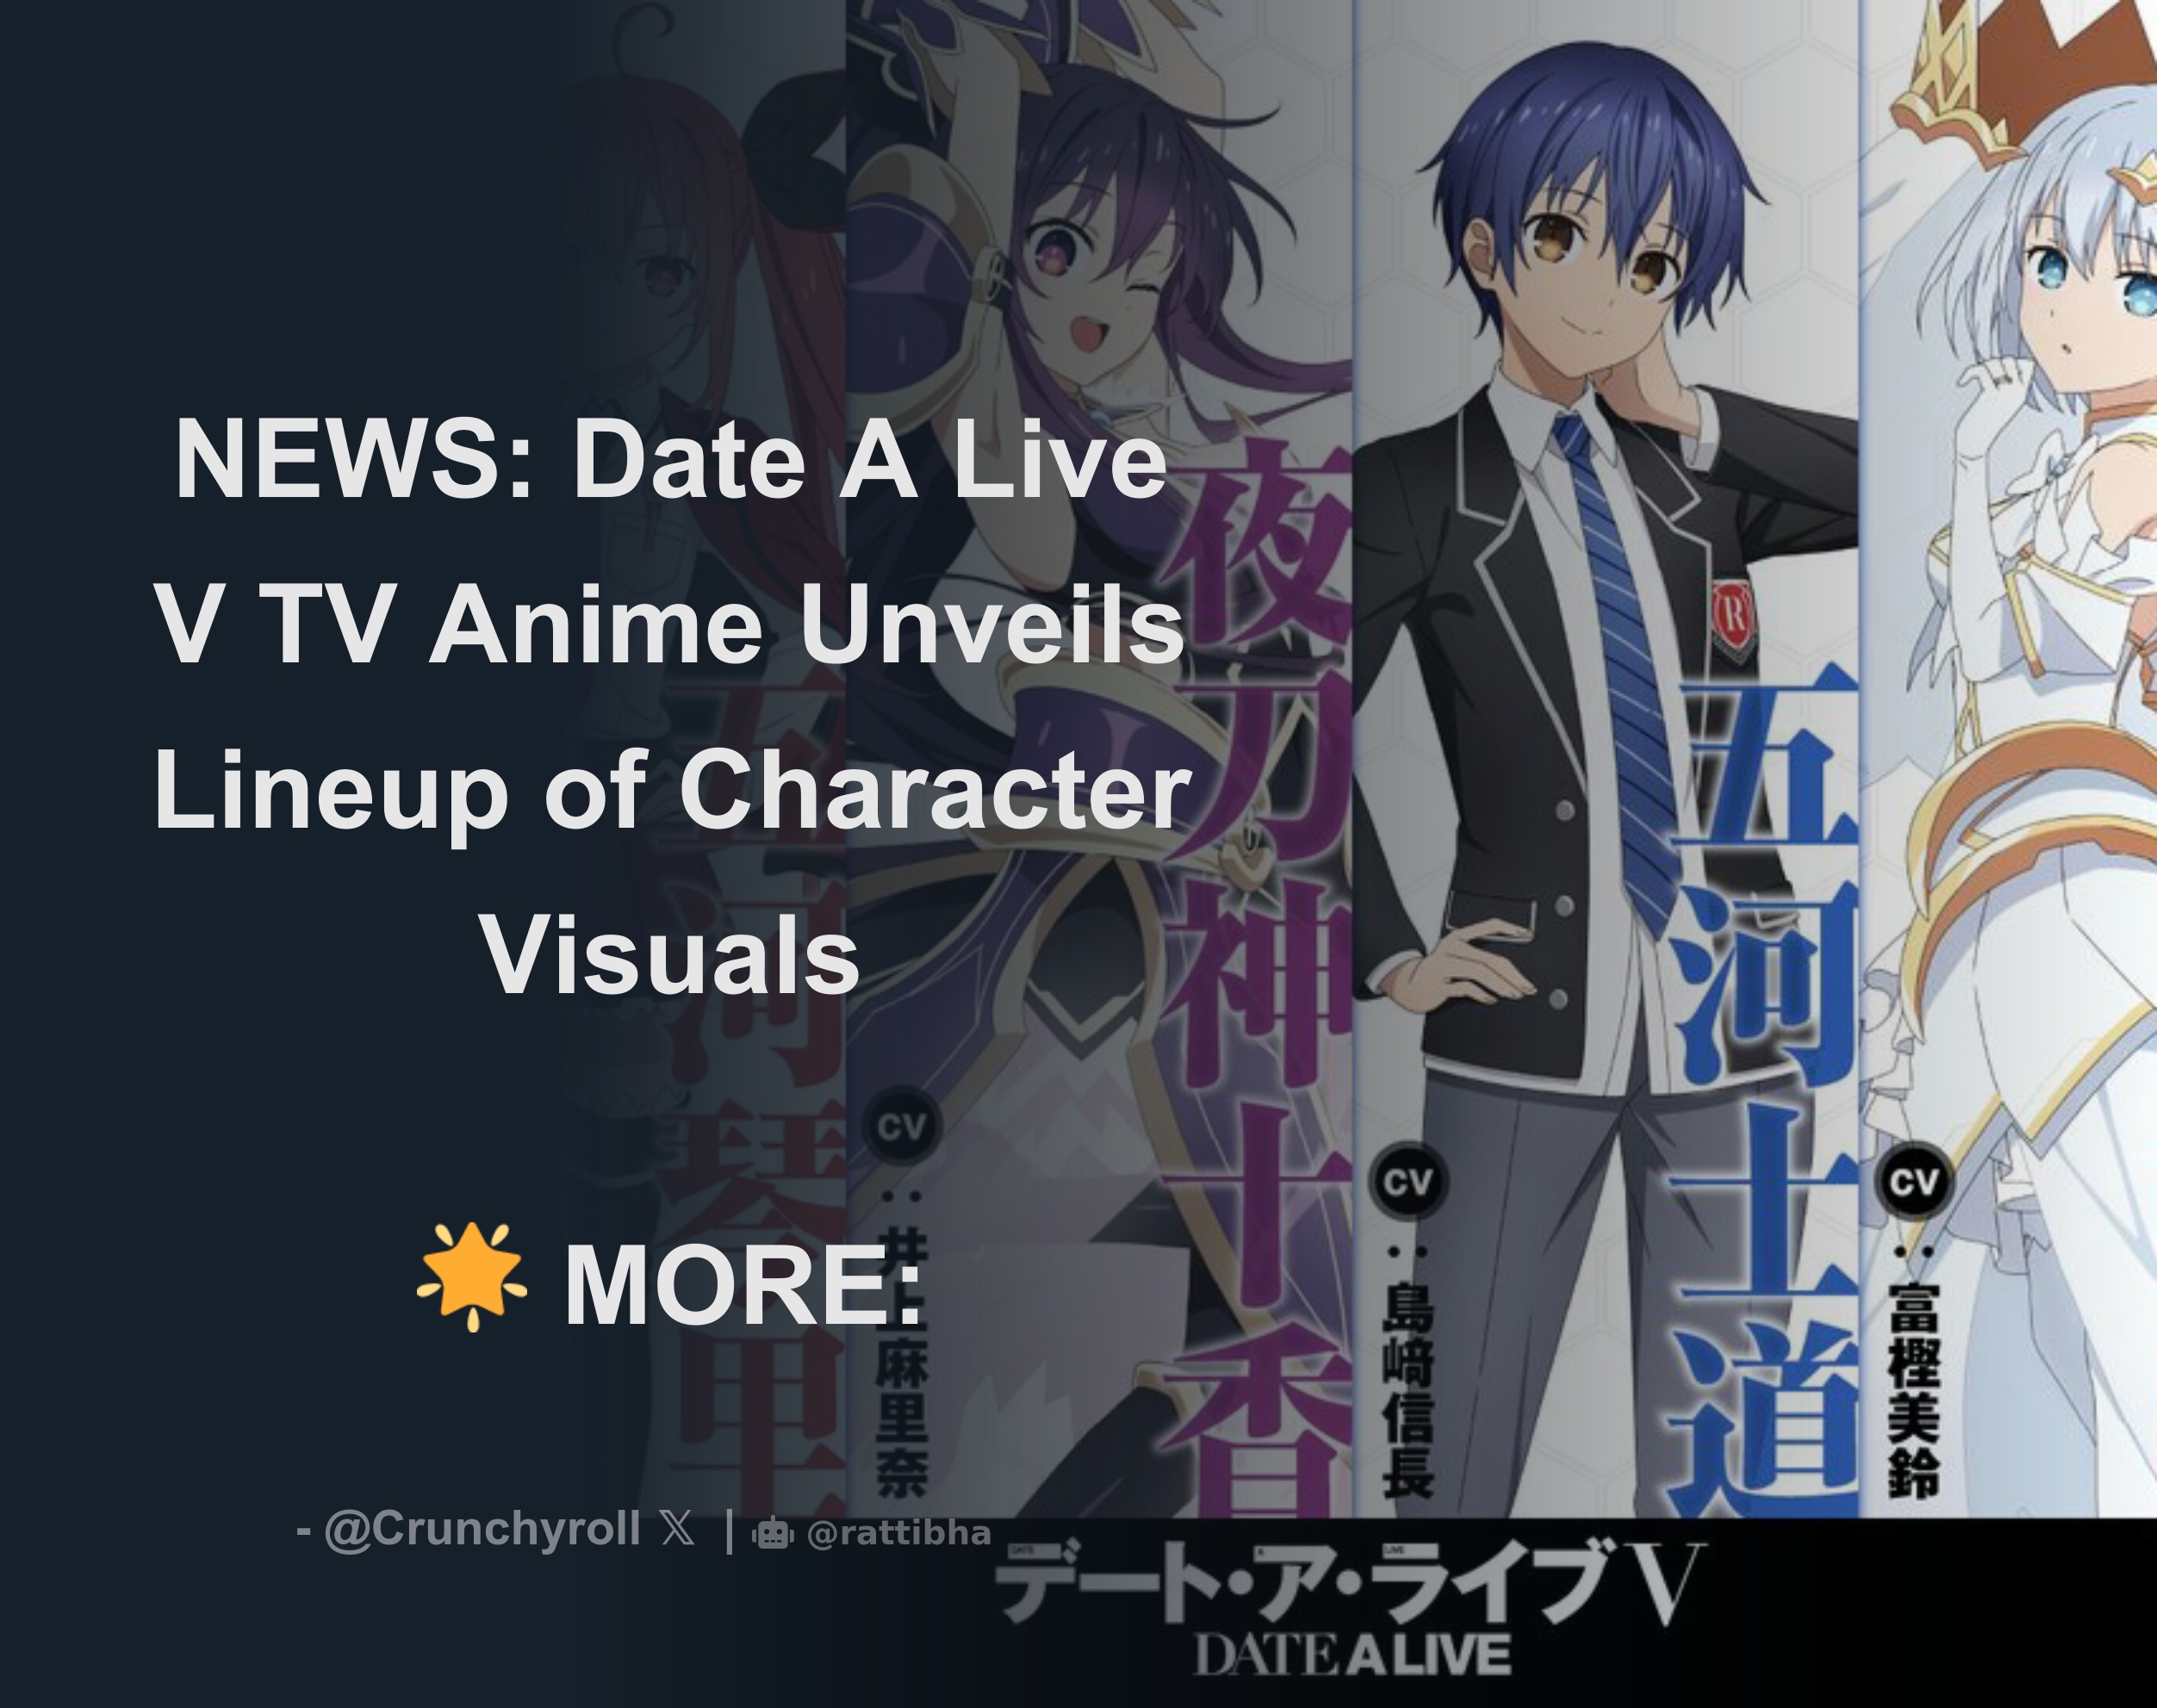 Date A Live V TV Anime Unveils Lineup of Character Visuals - Crunchyroll  News